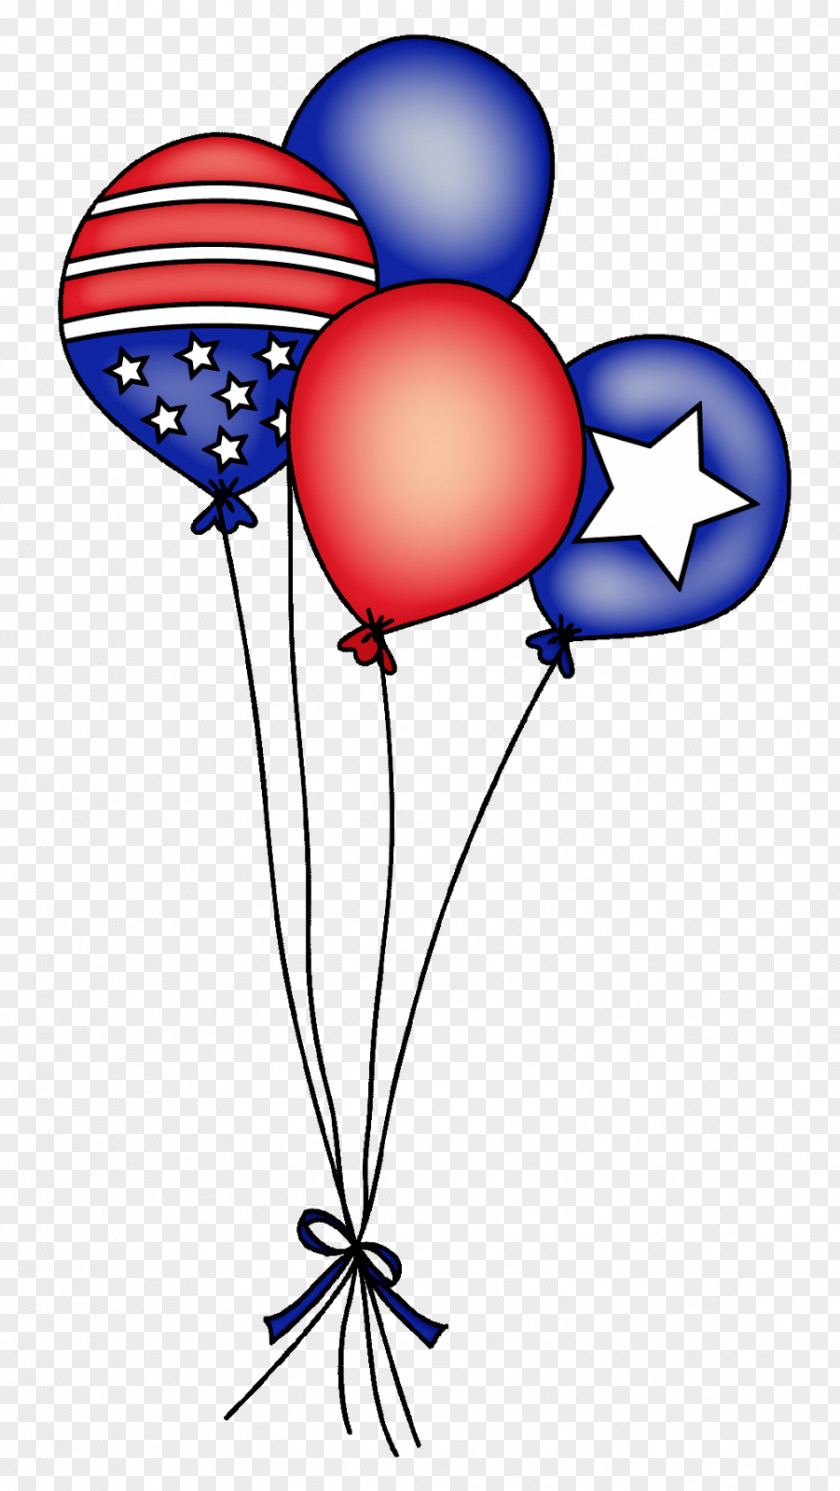 Free Balloon Buckle Elements Modelling Independence Day Clip Art PNG